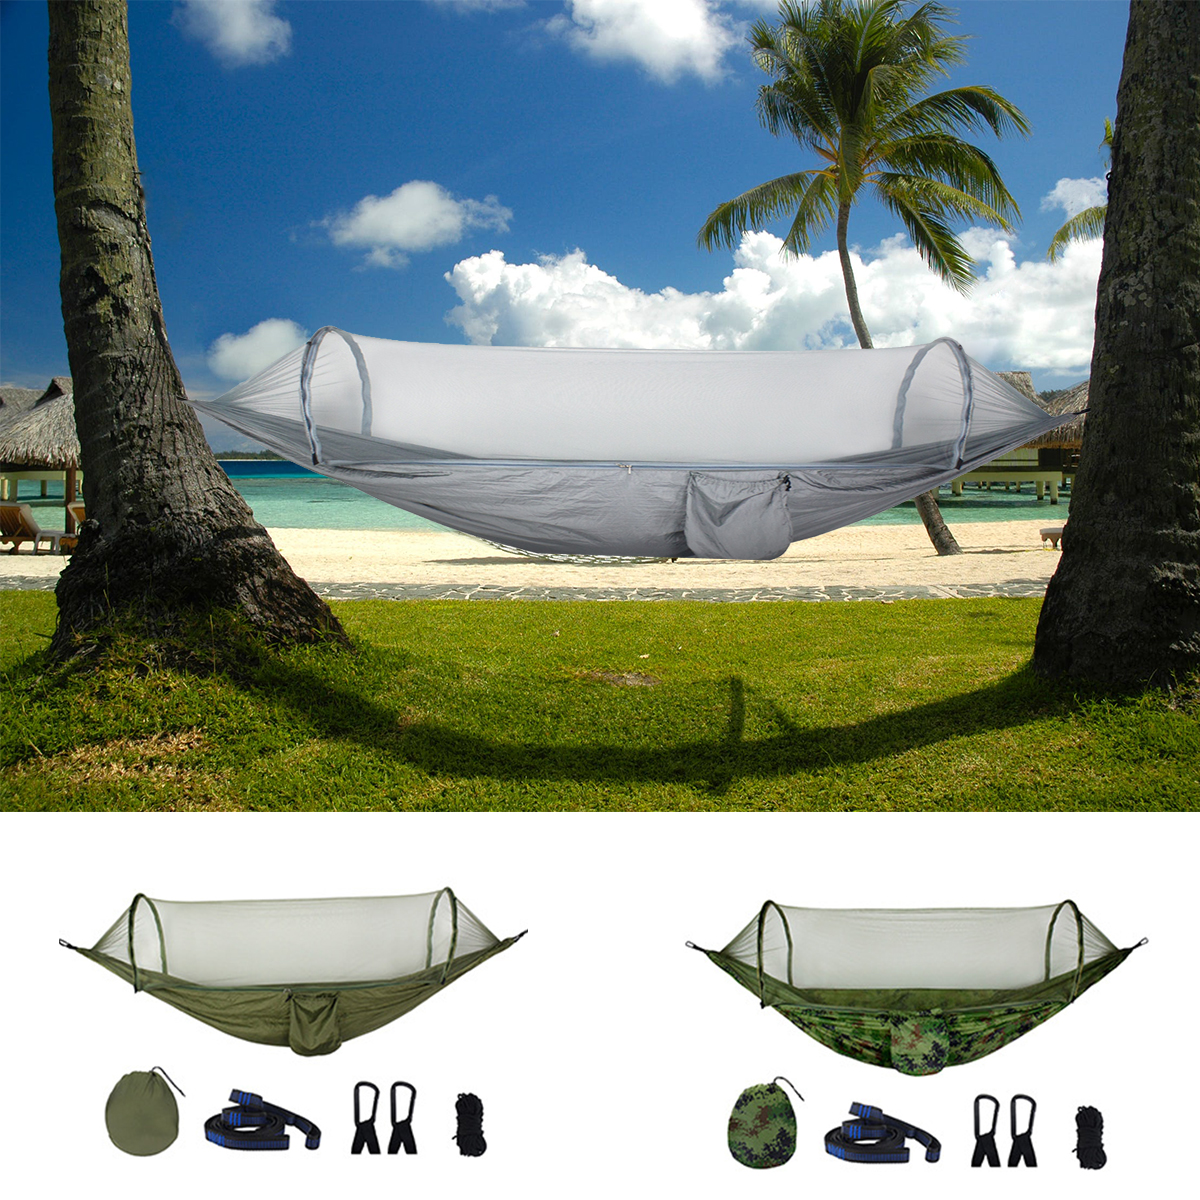 270x140cm-Auto-Quick-Open-Hammock-Outdoor-Camping-Hanging-Swing-Bed-With-Mosquito-Net-Max-Load-250kg-1549846-8